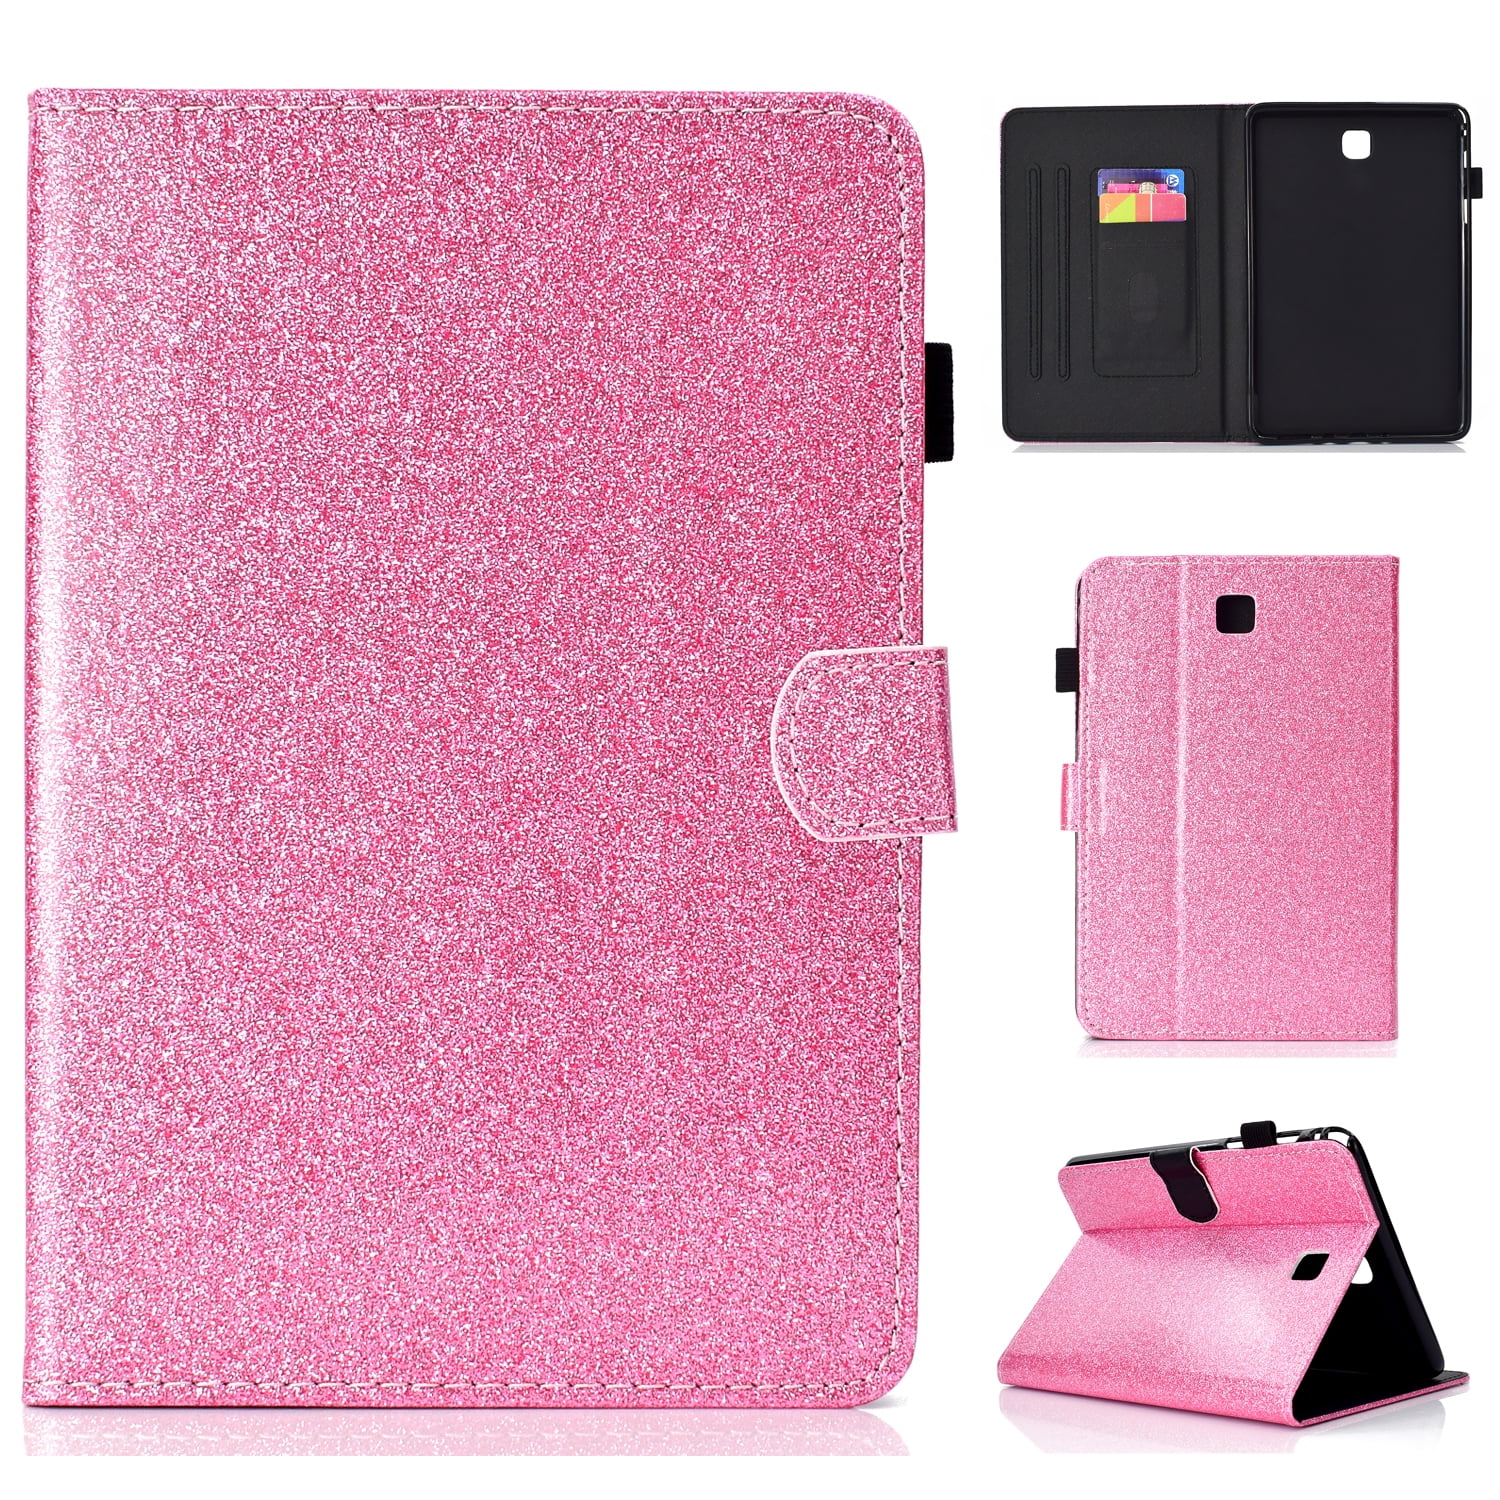 Galaxy Tab A 10.1 T580 Case 2016 [NO S Pen] (NOT for P580), Allytech Glitter Leather Wake Protective Folio Stand Slim Smart Cover w/ Pen Holder Case for Samsung Galaxy